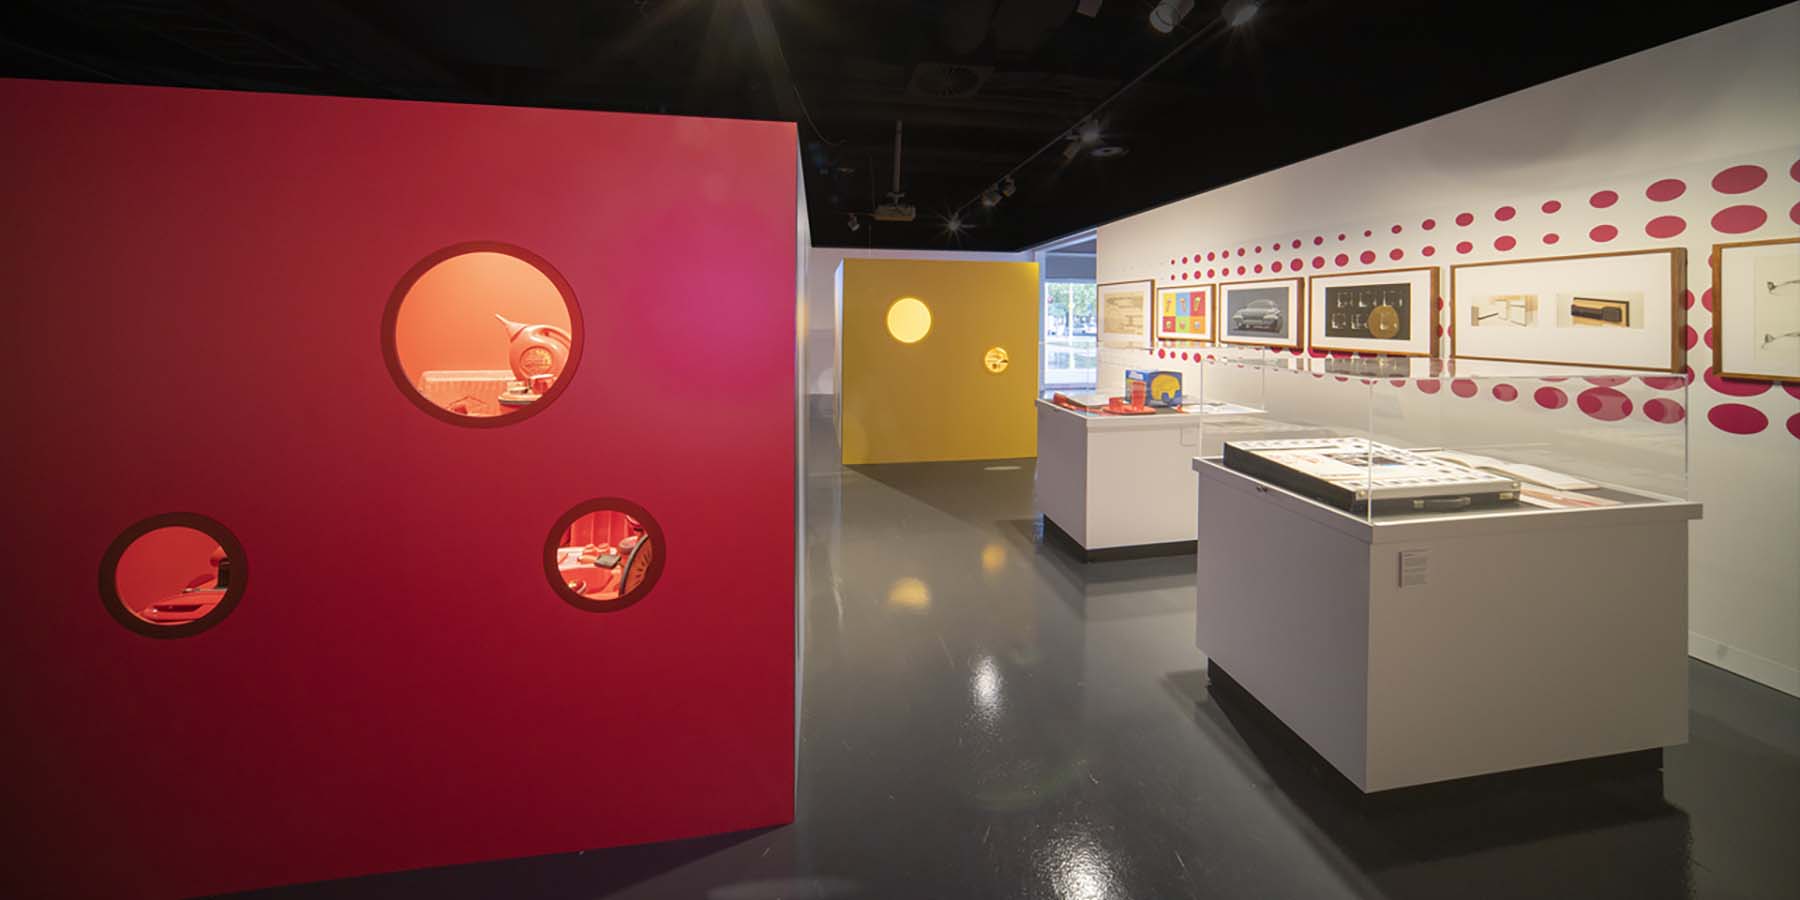 Light Colour Humanity exhibition at CMAG. View of red and yellow cubes, object display and original design drawings.